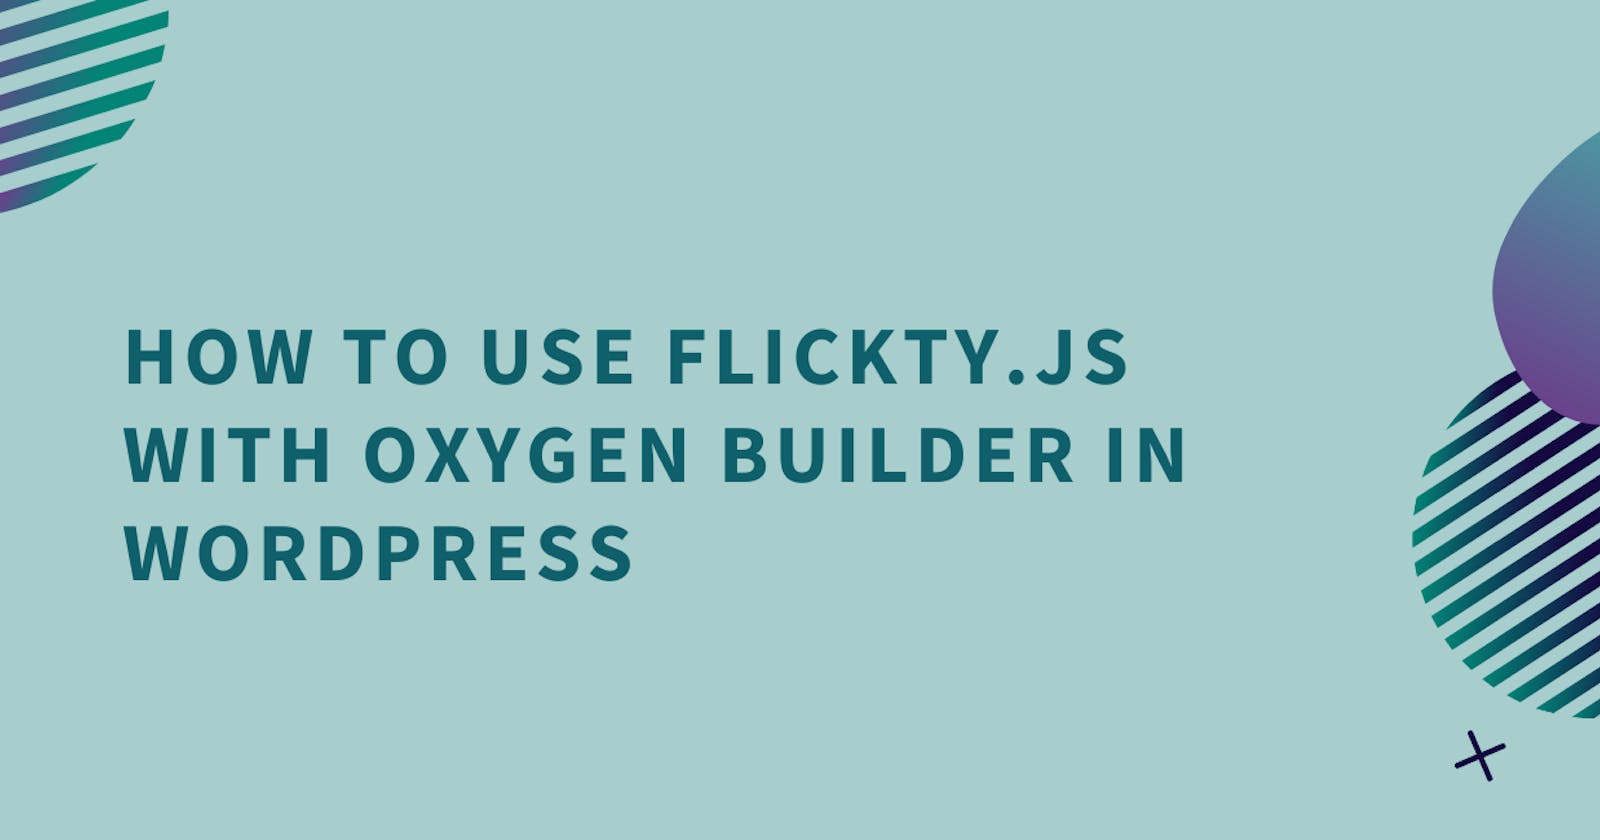 How to use flickity js slider with oxygen builder in wordpress